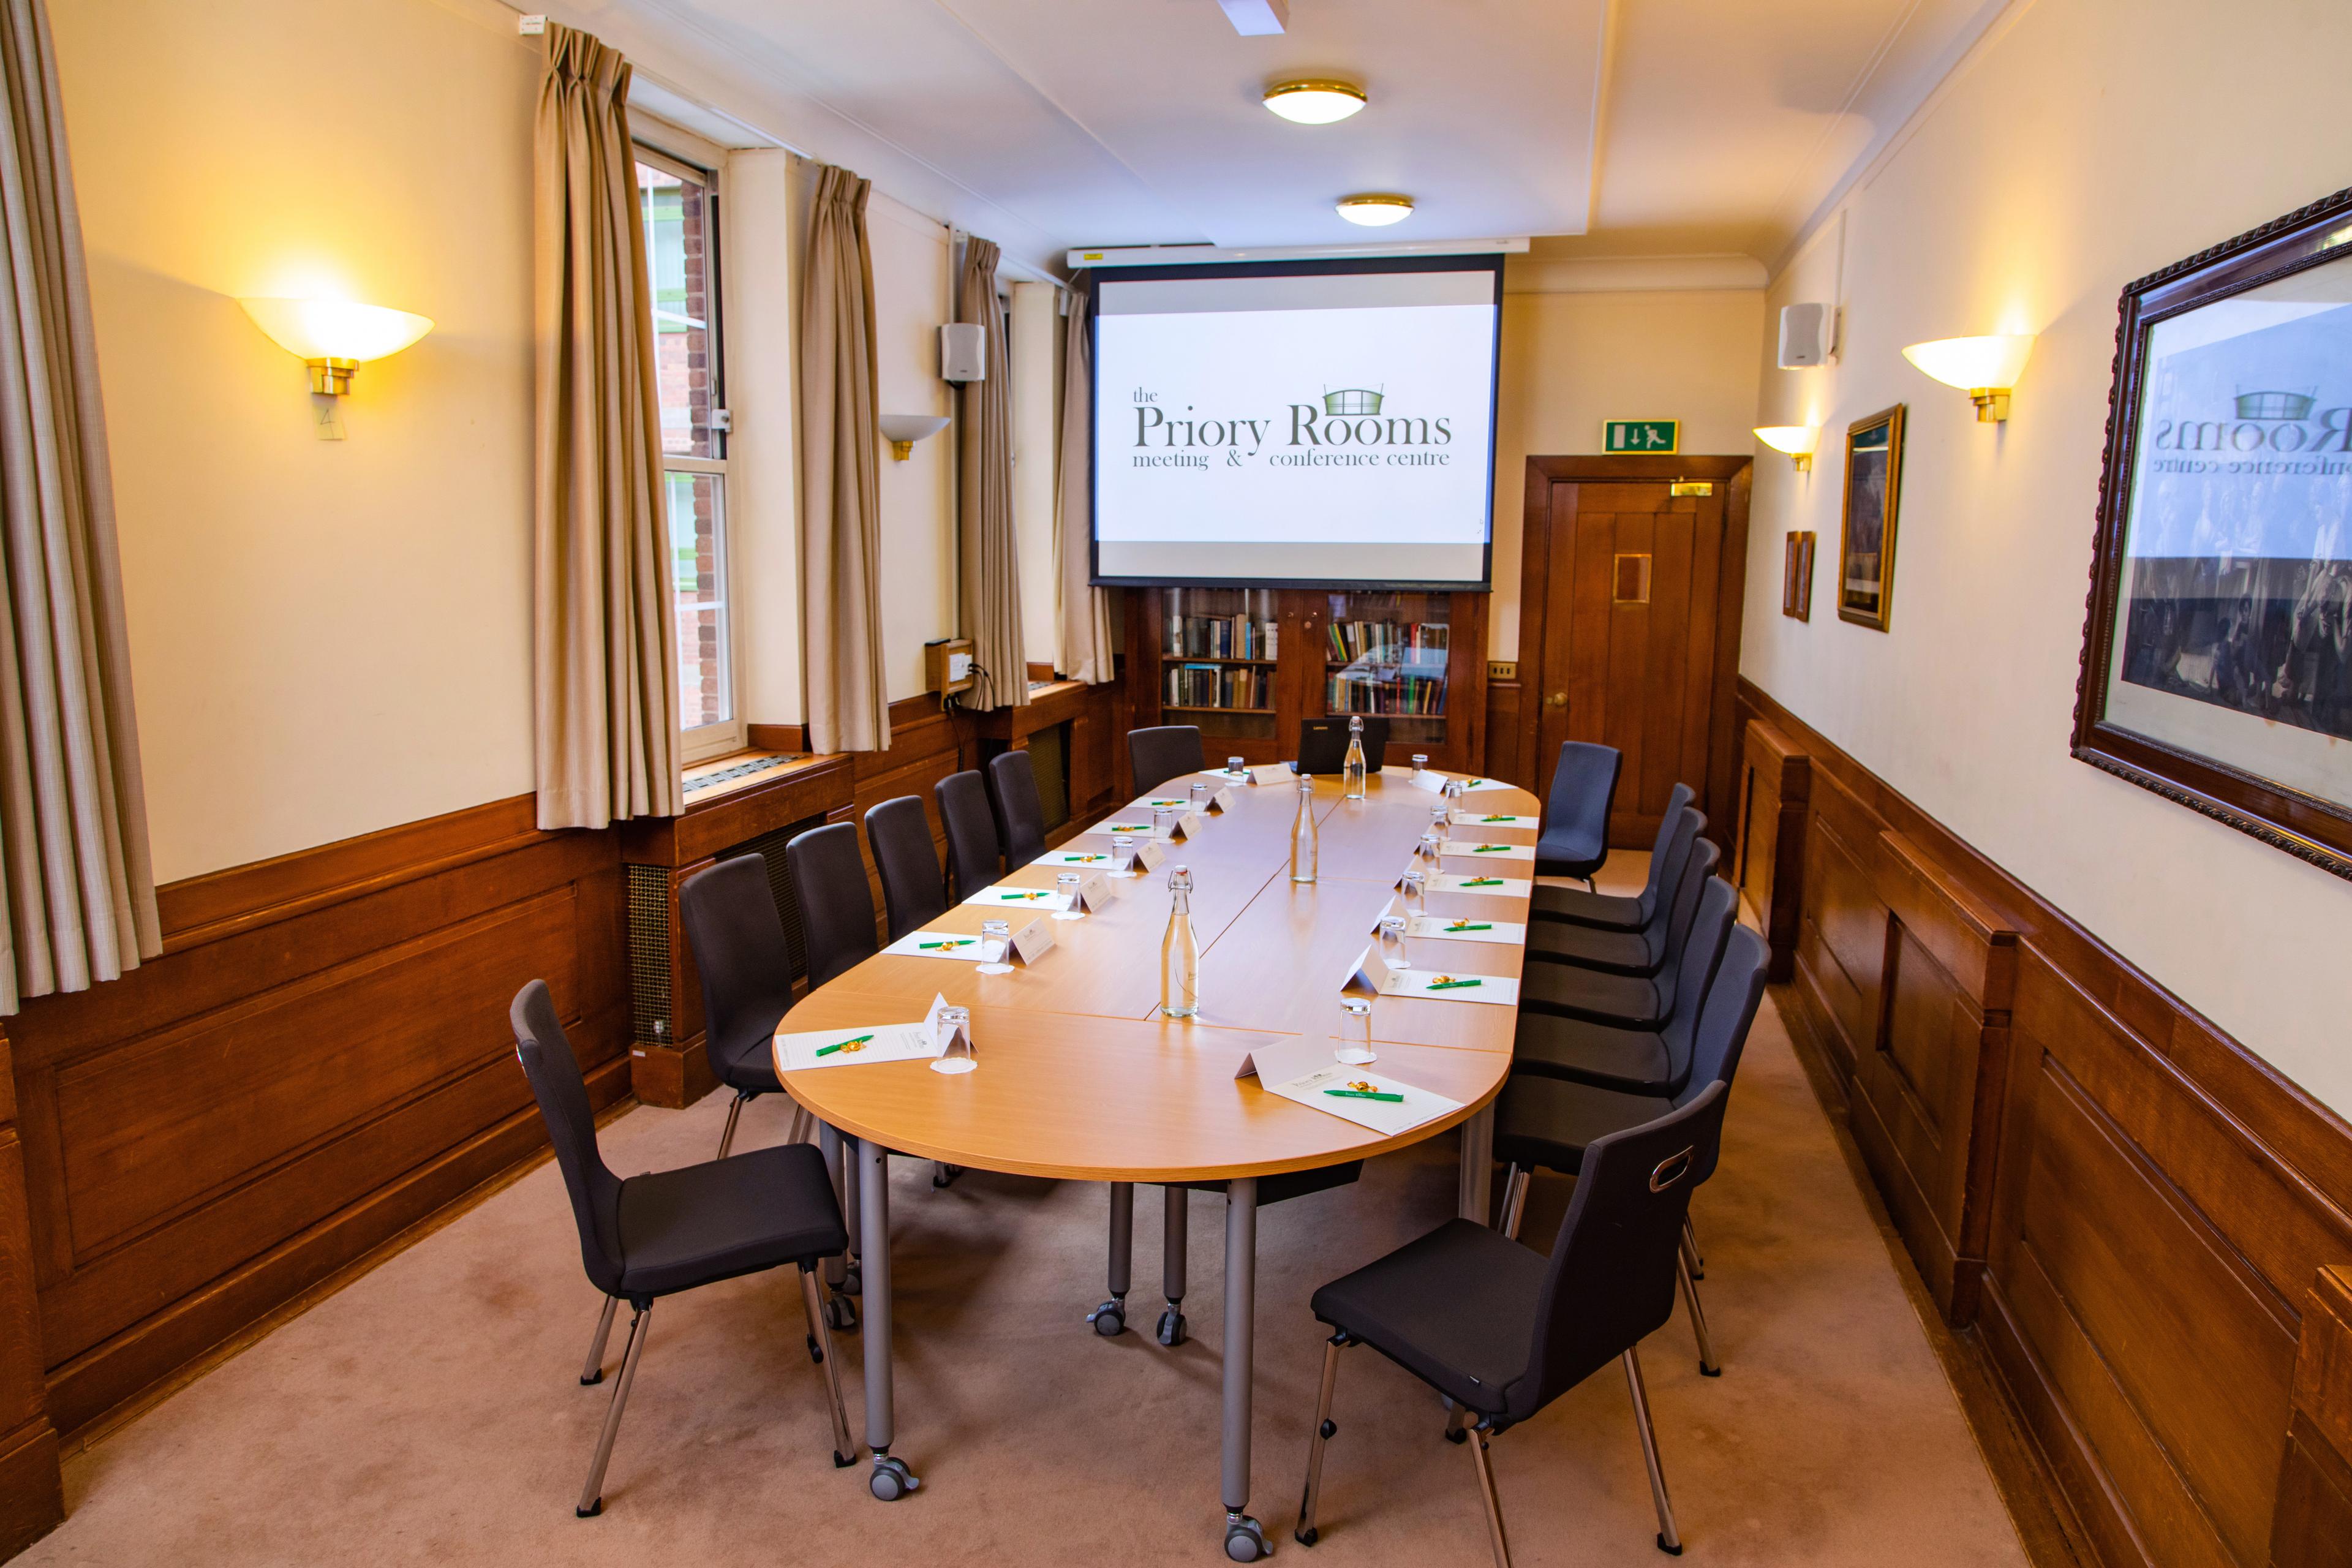 The Priory Rooms Meeting & Conference Centre, Reading Room photo #1